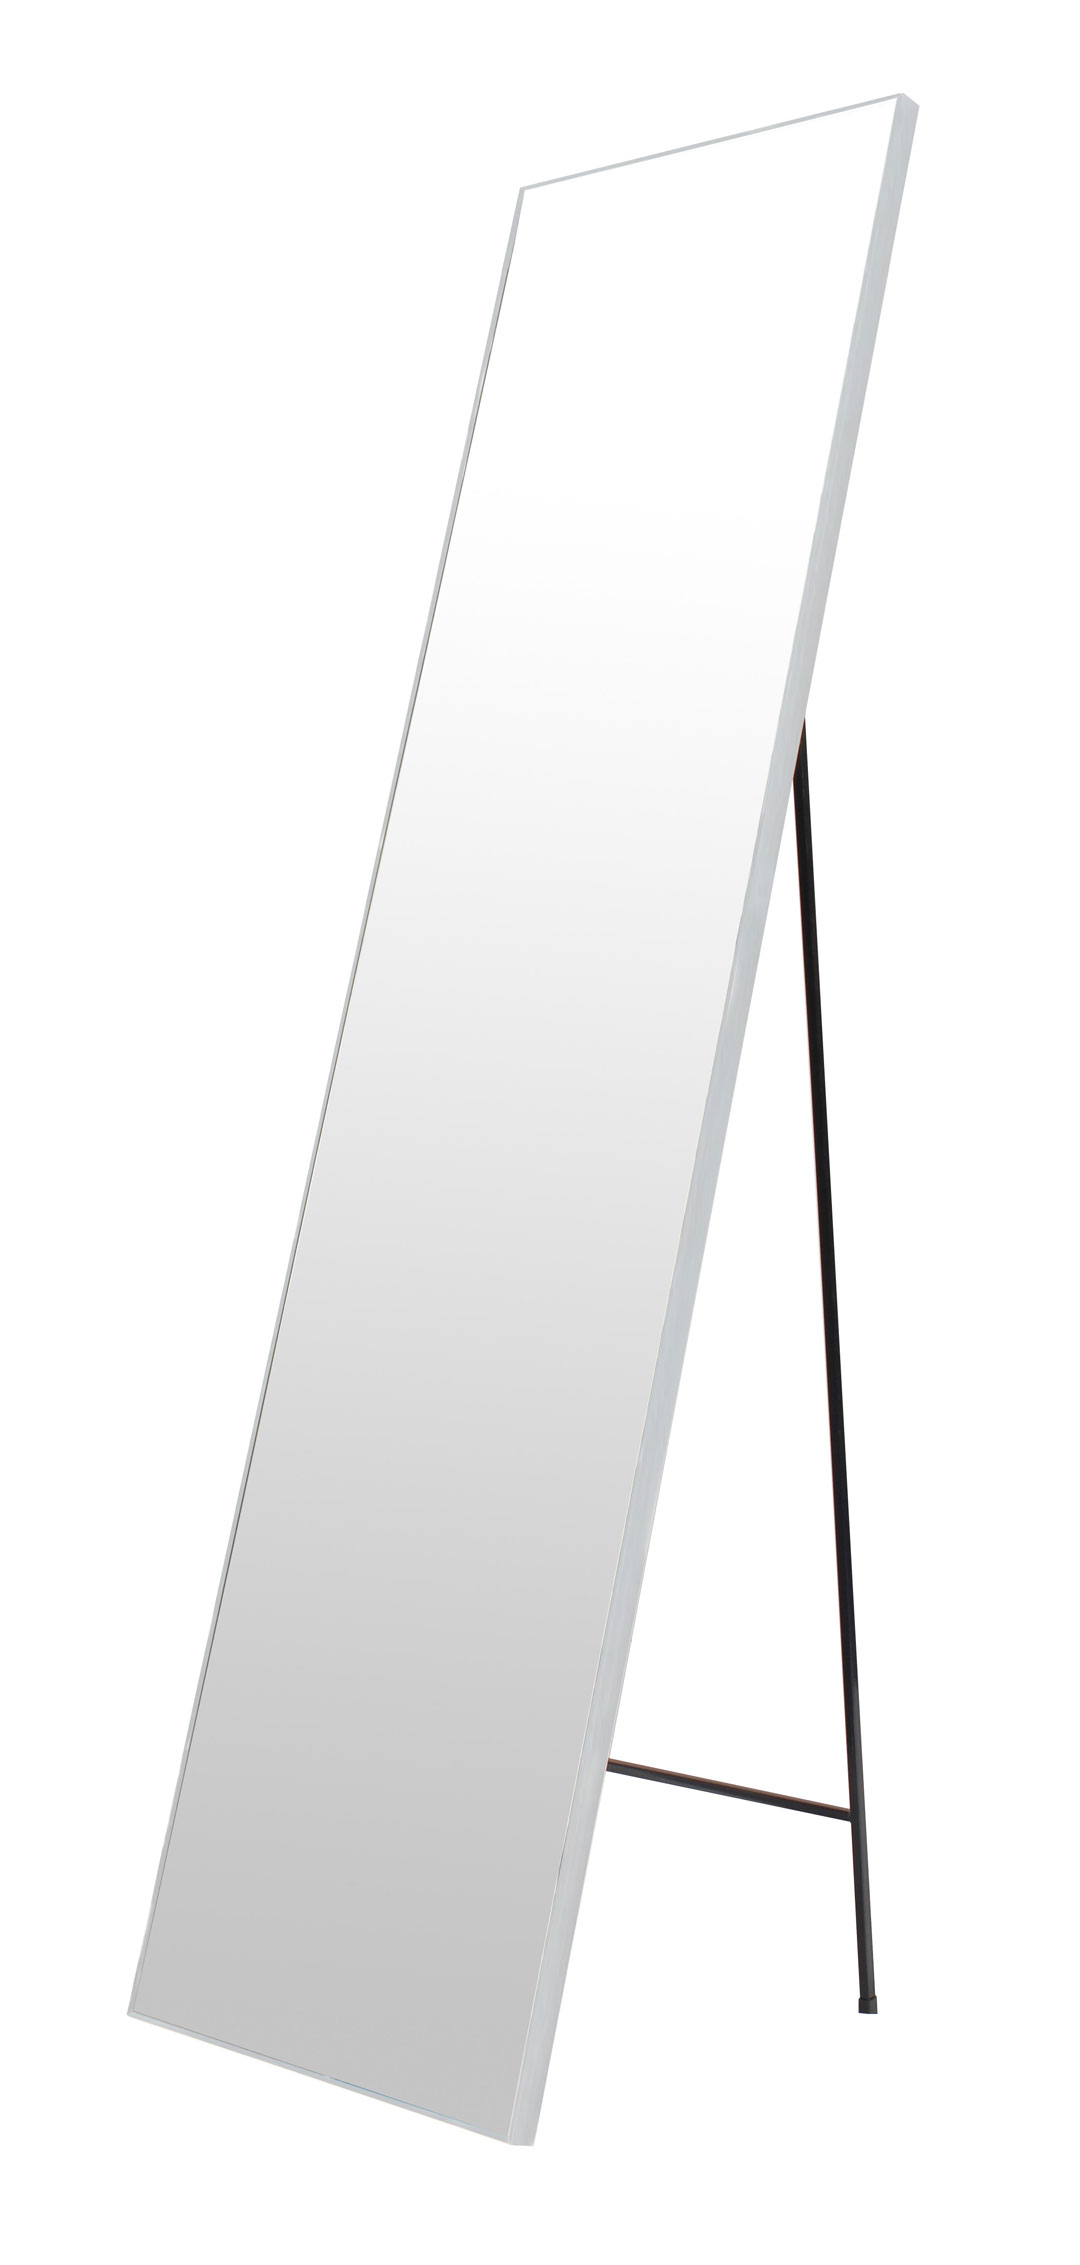 SUPERLIVING FULL BODY MIRROR WITH STAND 40X150CM SILVER